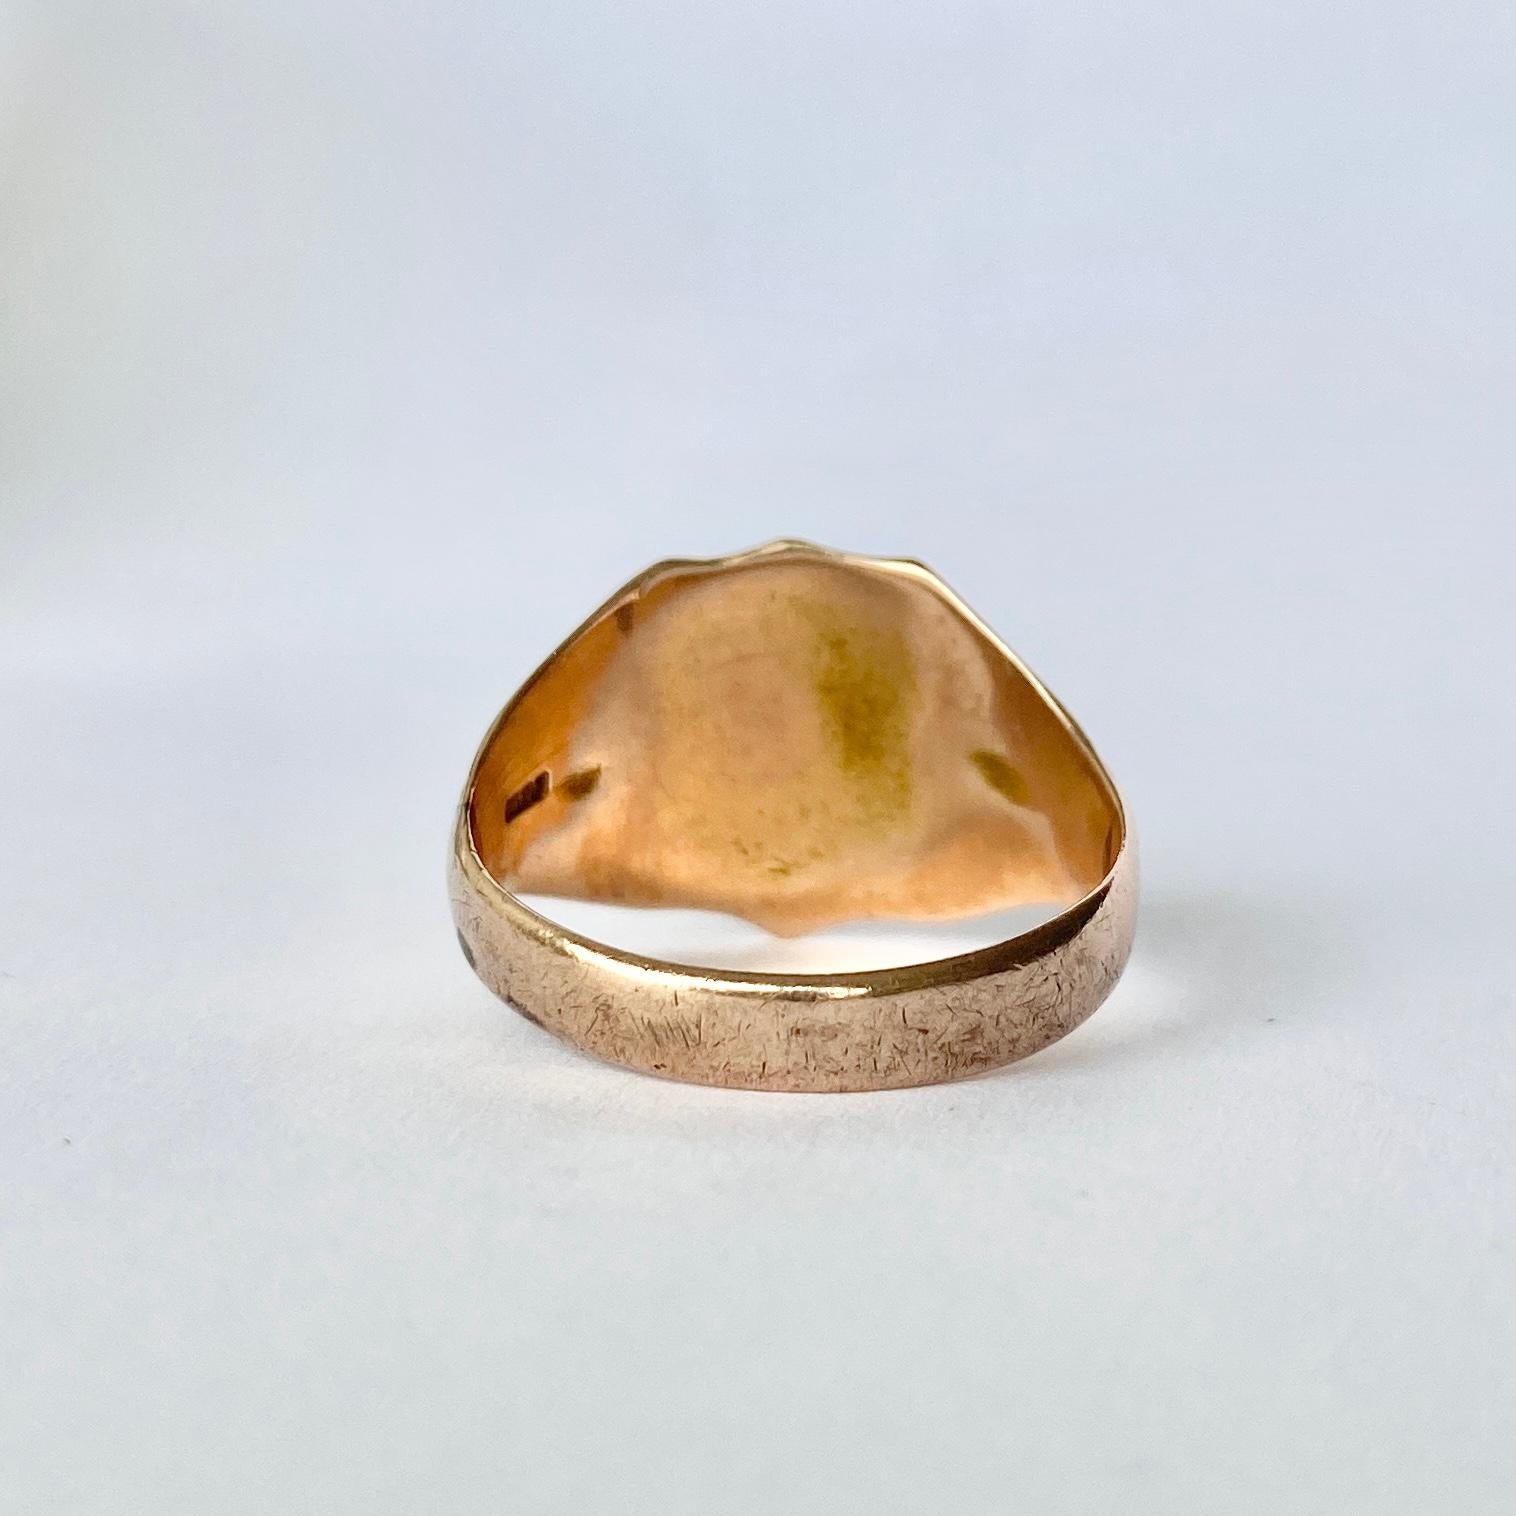 This classic signet ring has shield shaped detail which is finely and engraved. Modelled in 9ct gold. Fully hallmarked Birmingham 1900.

Ring Size: Q 1/2 or 8 1/4 
Band Width: 14mm 

Weight:  4.1g 